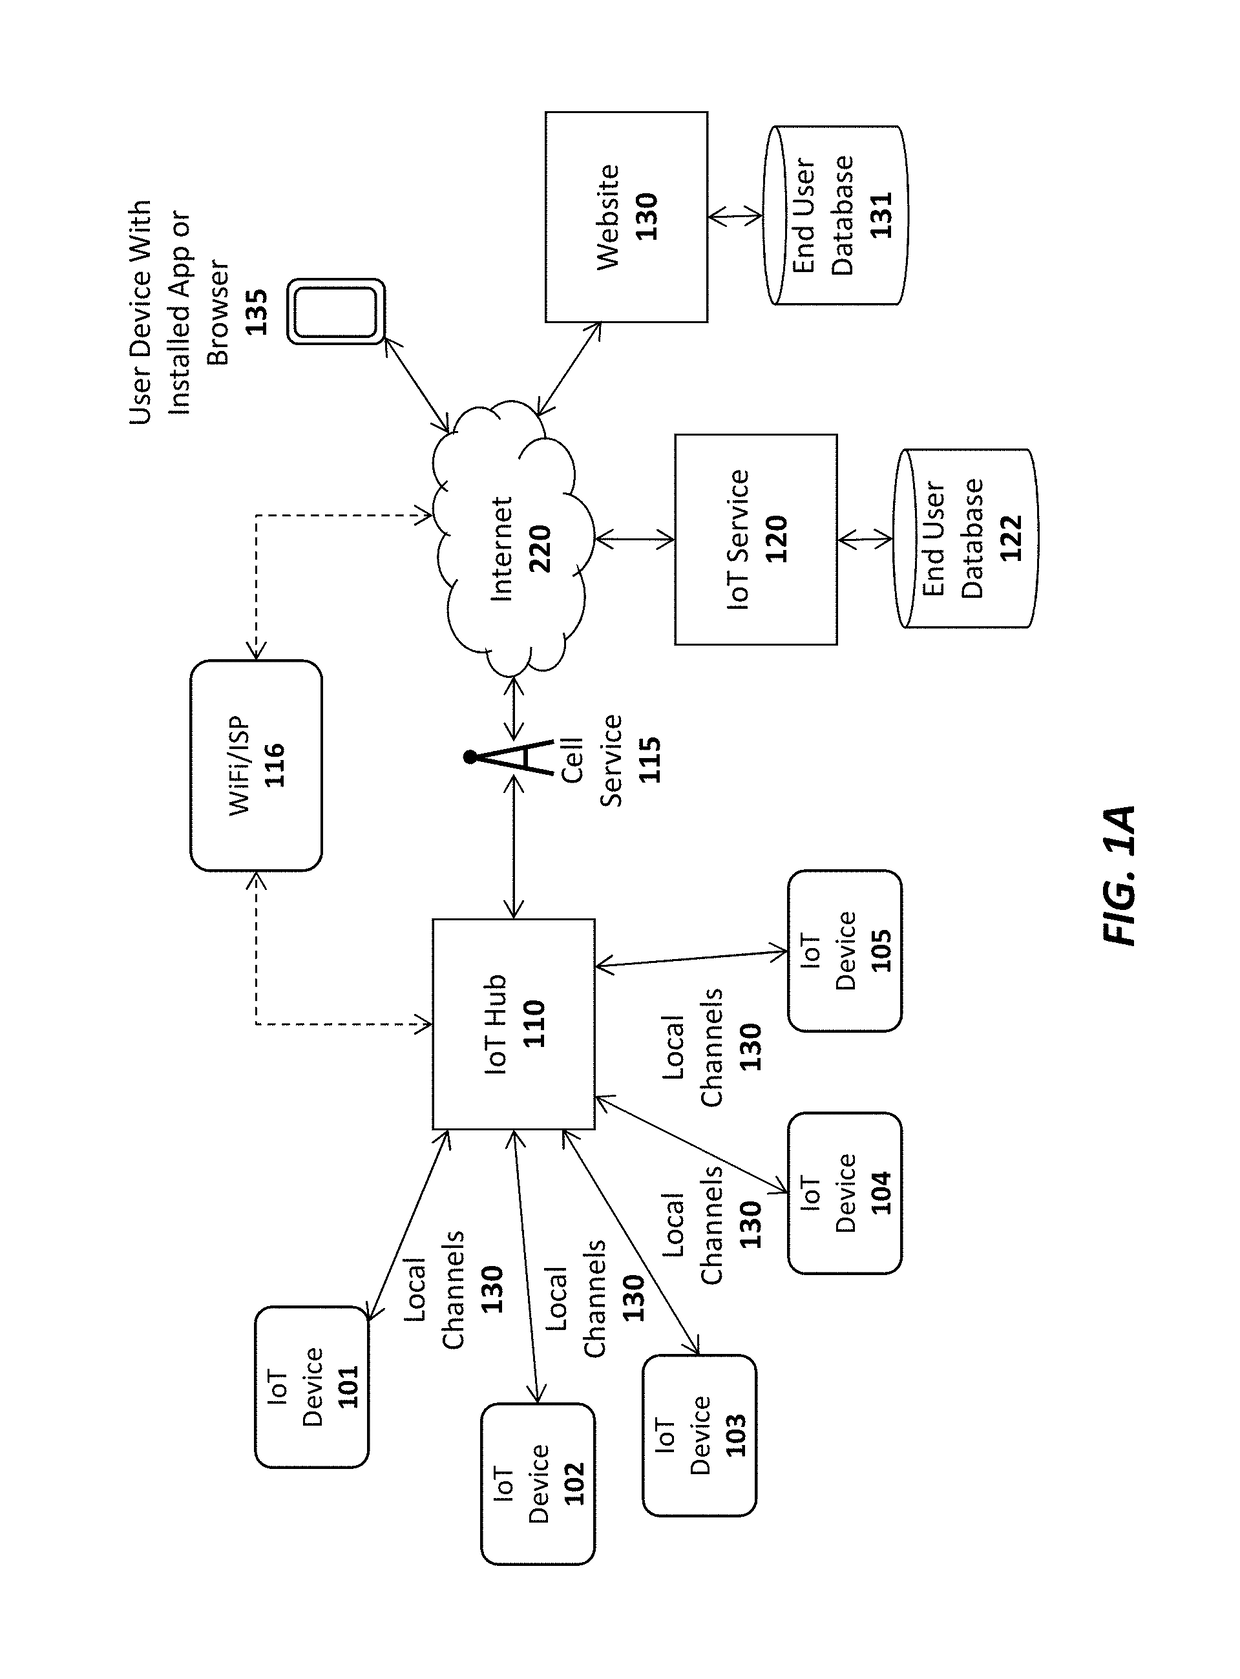 Embedded internet of things (IOT) hub for integration with an appliance and associated systems and methods